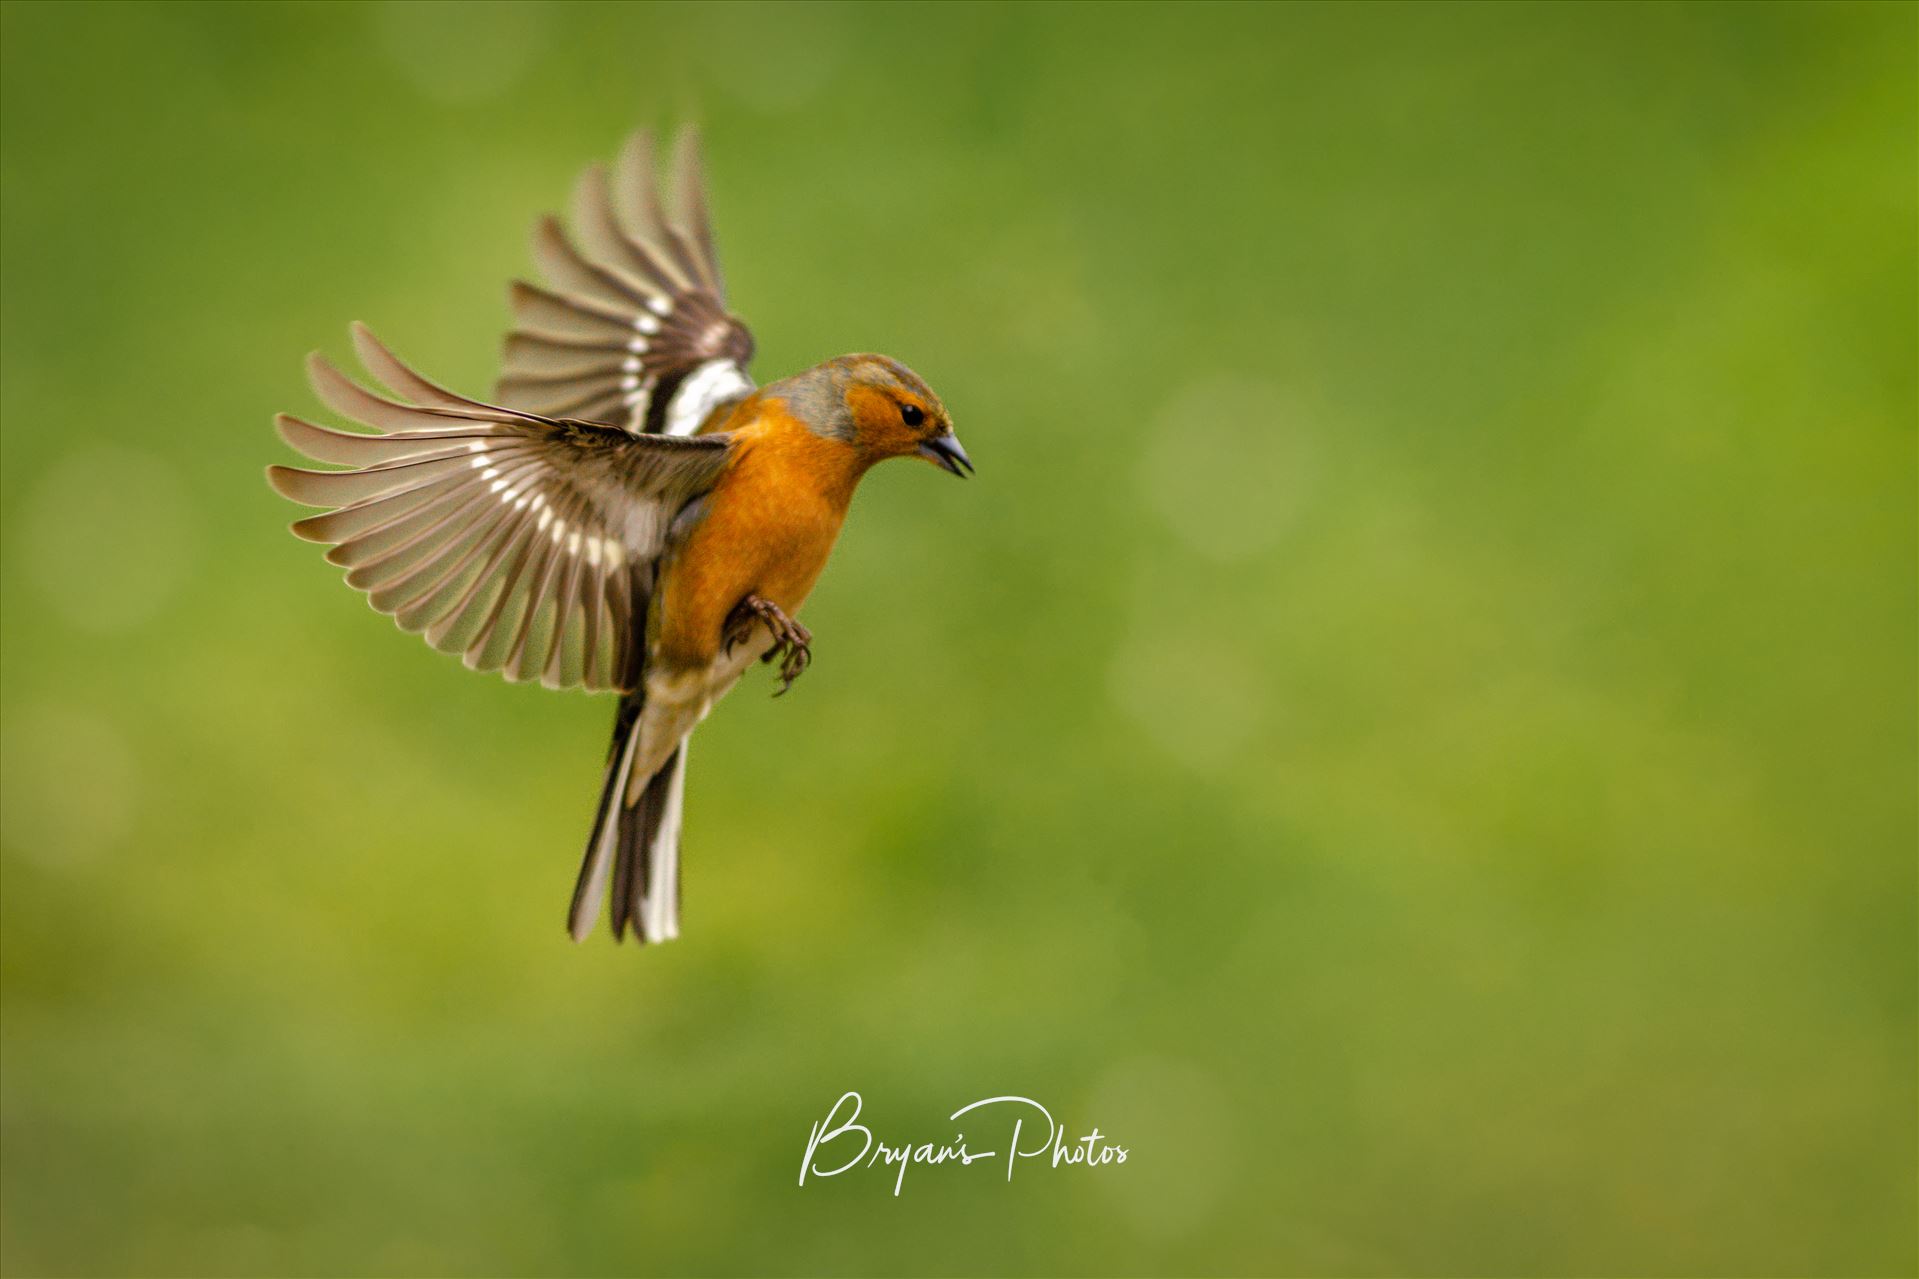 Flight of the Chaffinch A photograph of a male Chaffinch taken mid flight. by Bryans Photos